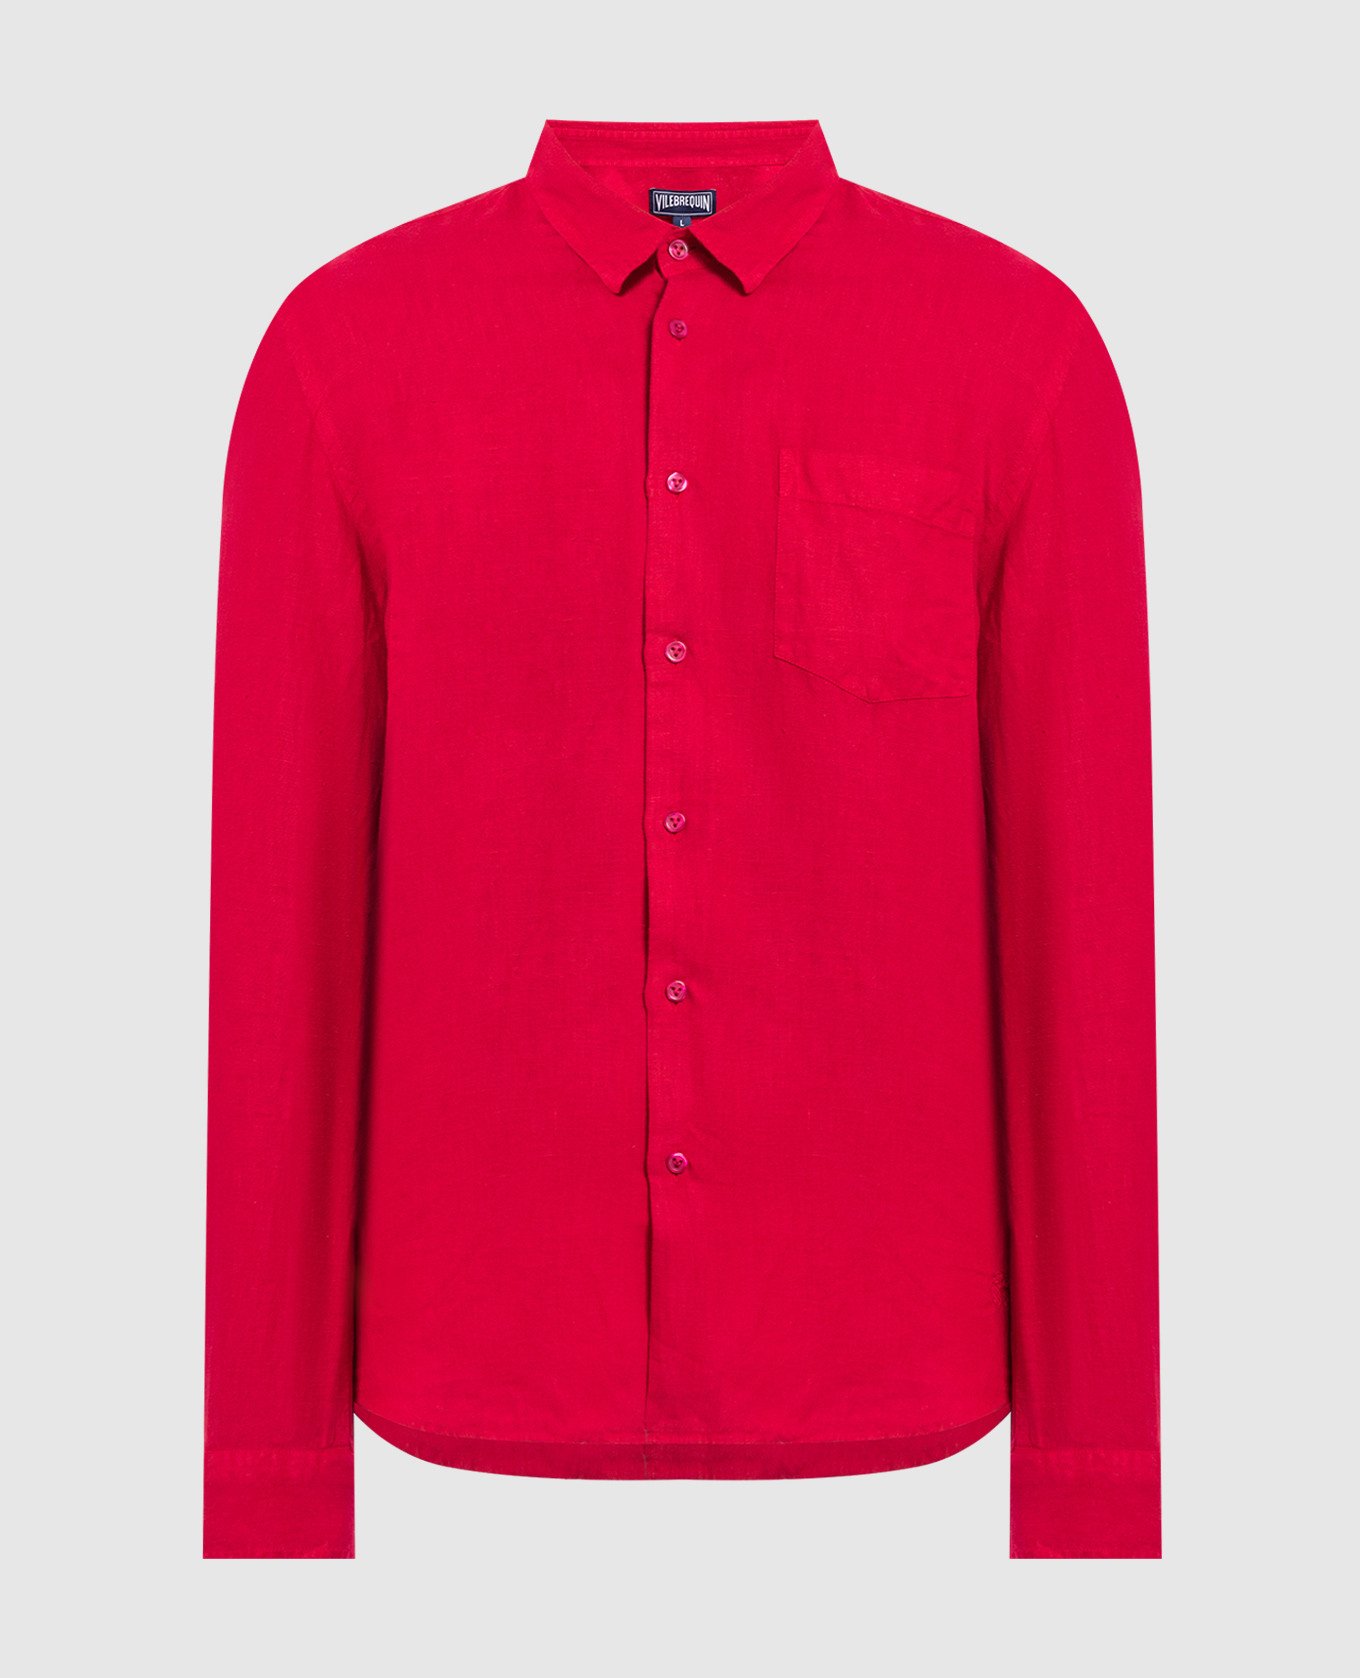 Caroubis red linen shirt with logo embroidery